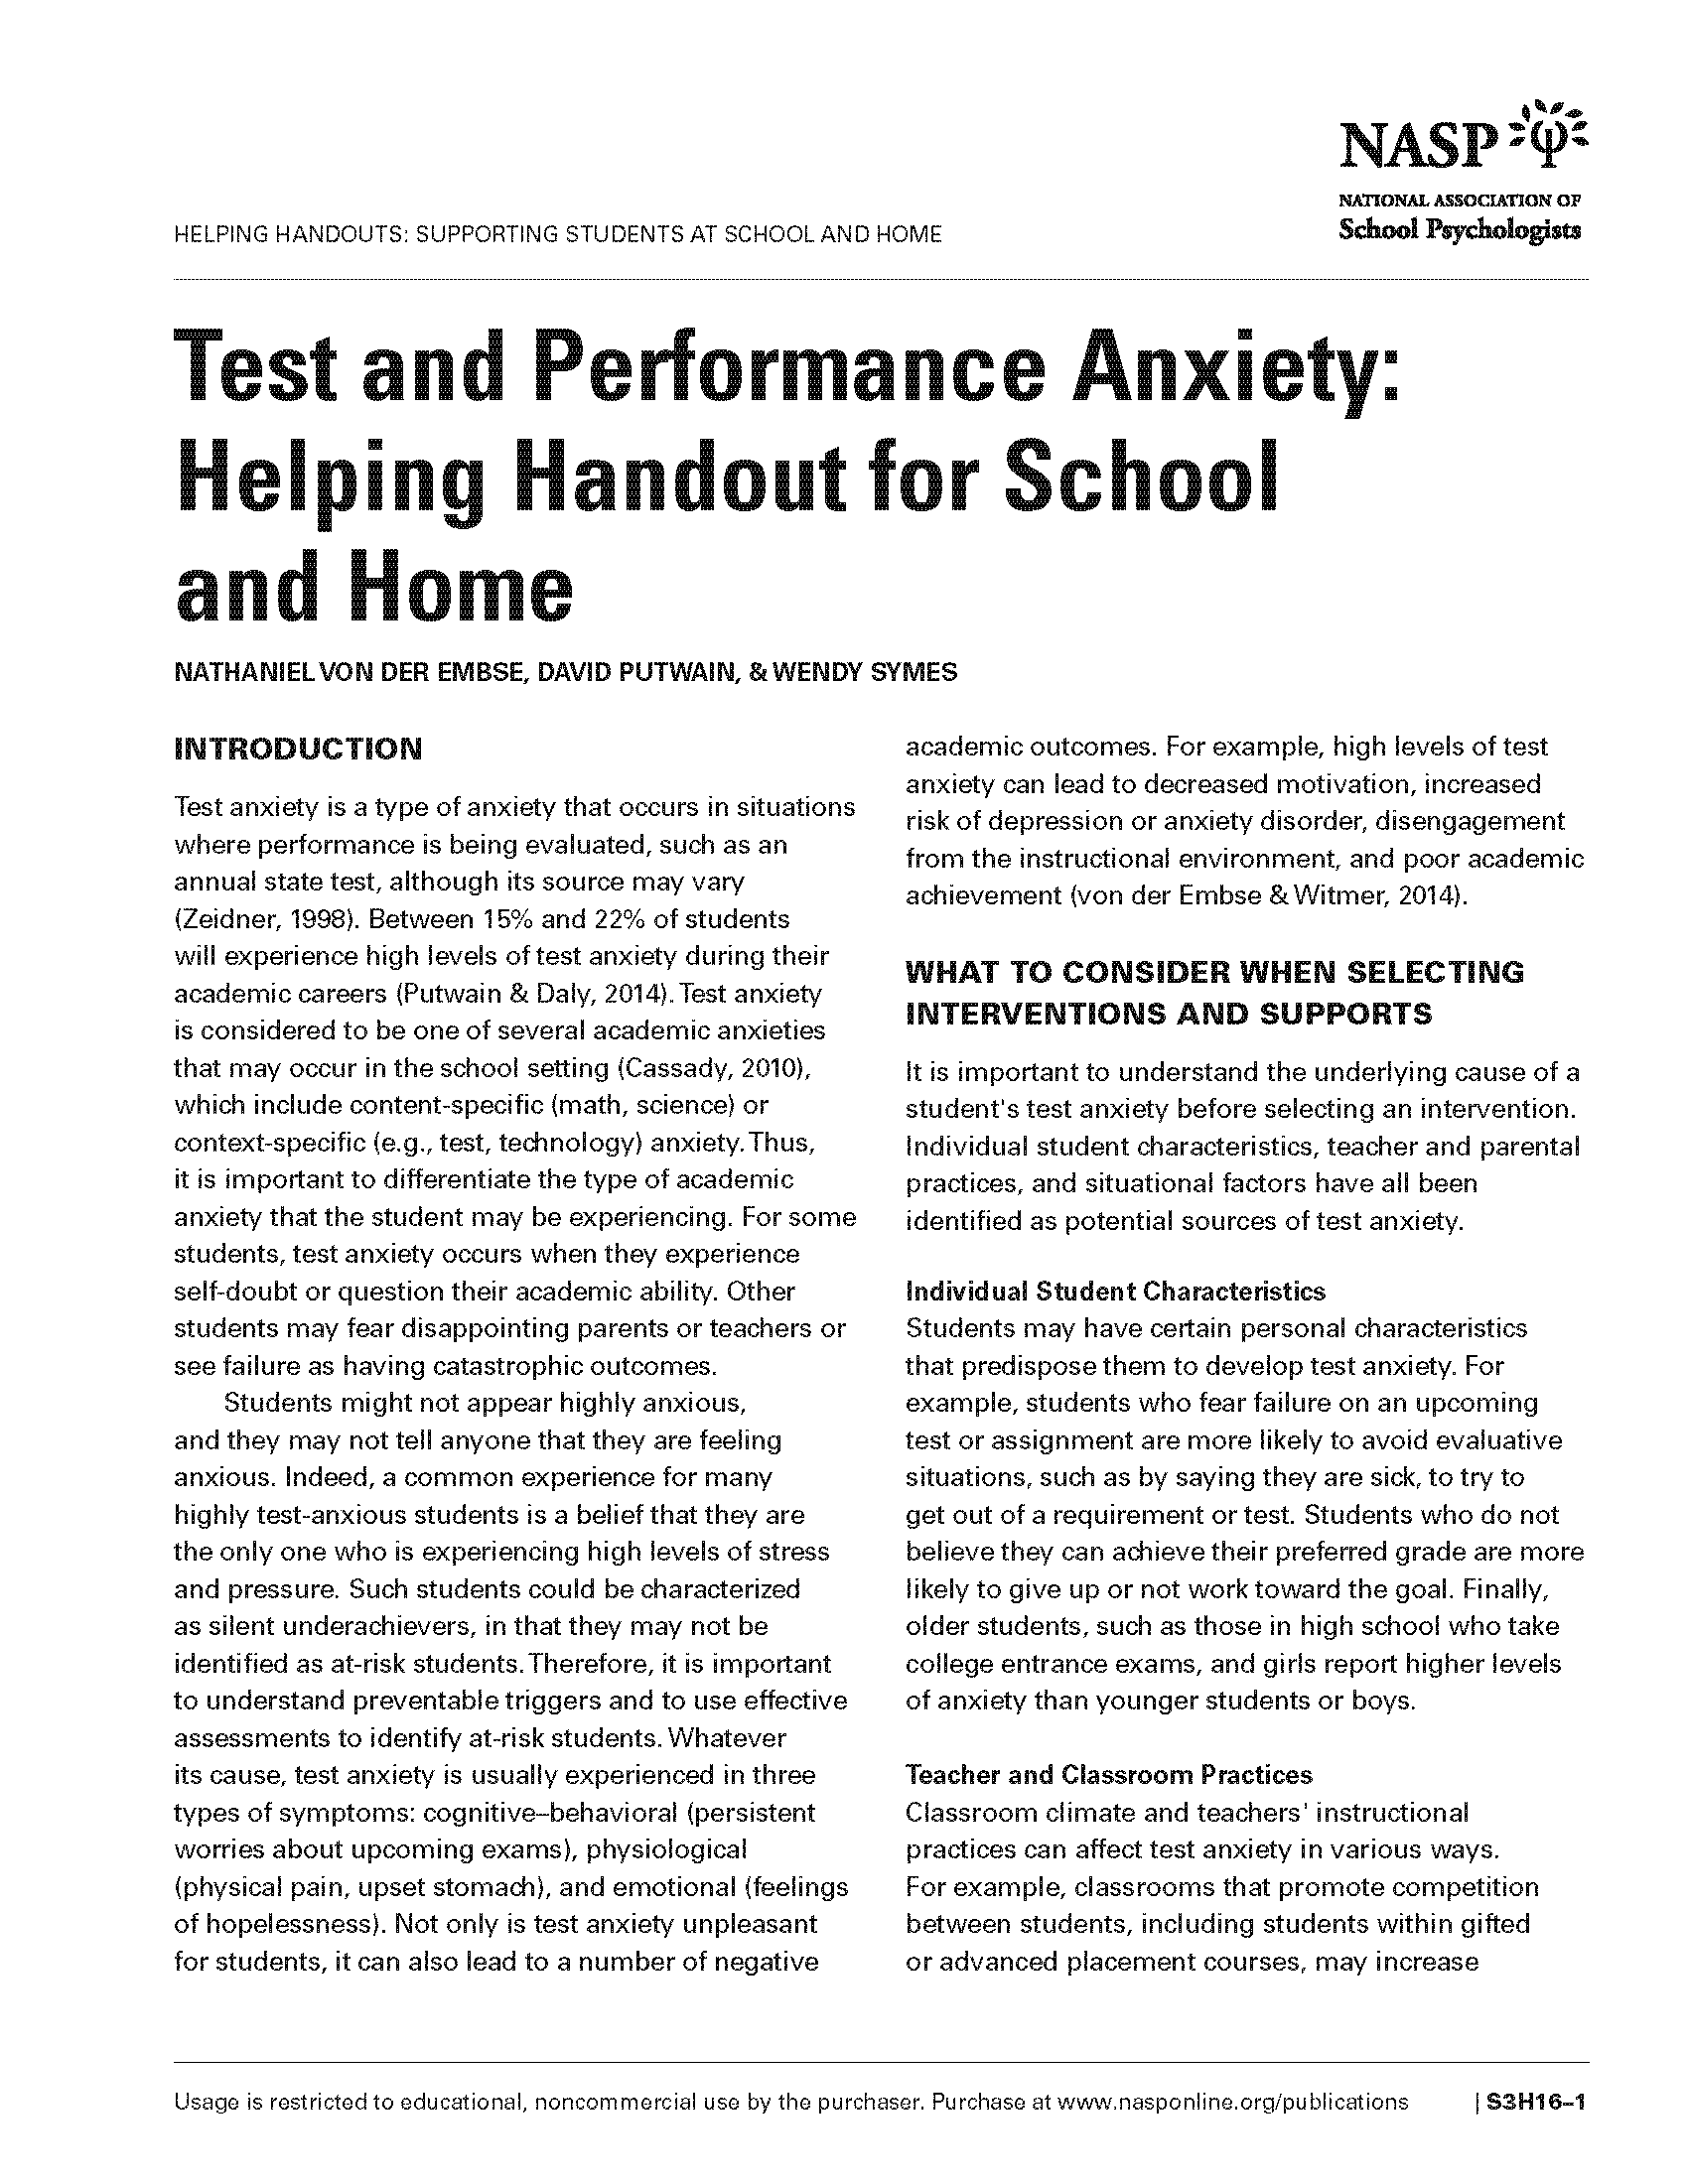 Test and Performance Anxiety: Helping Handout for School and Home